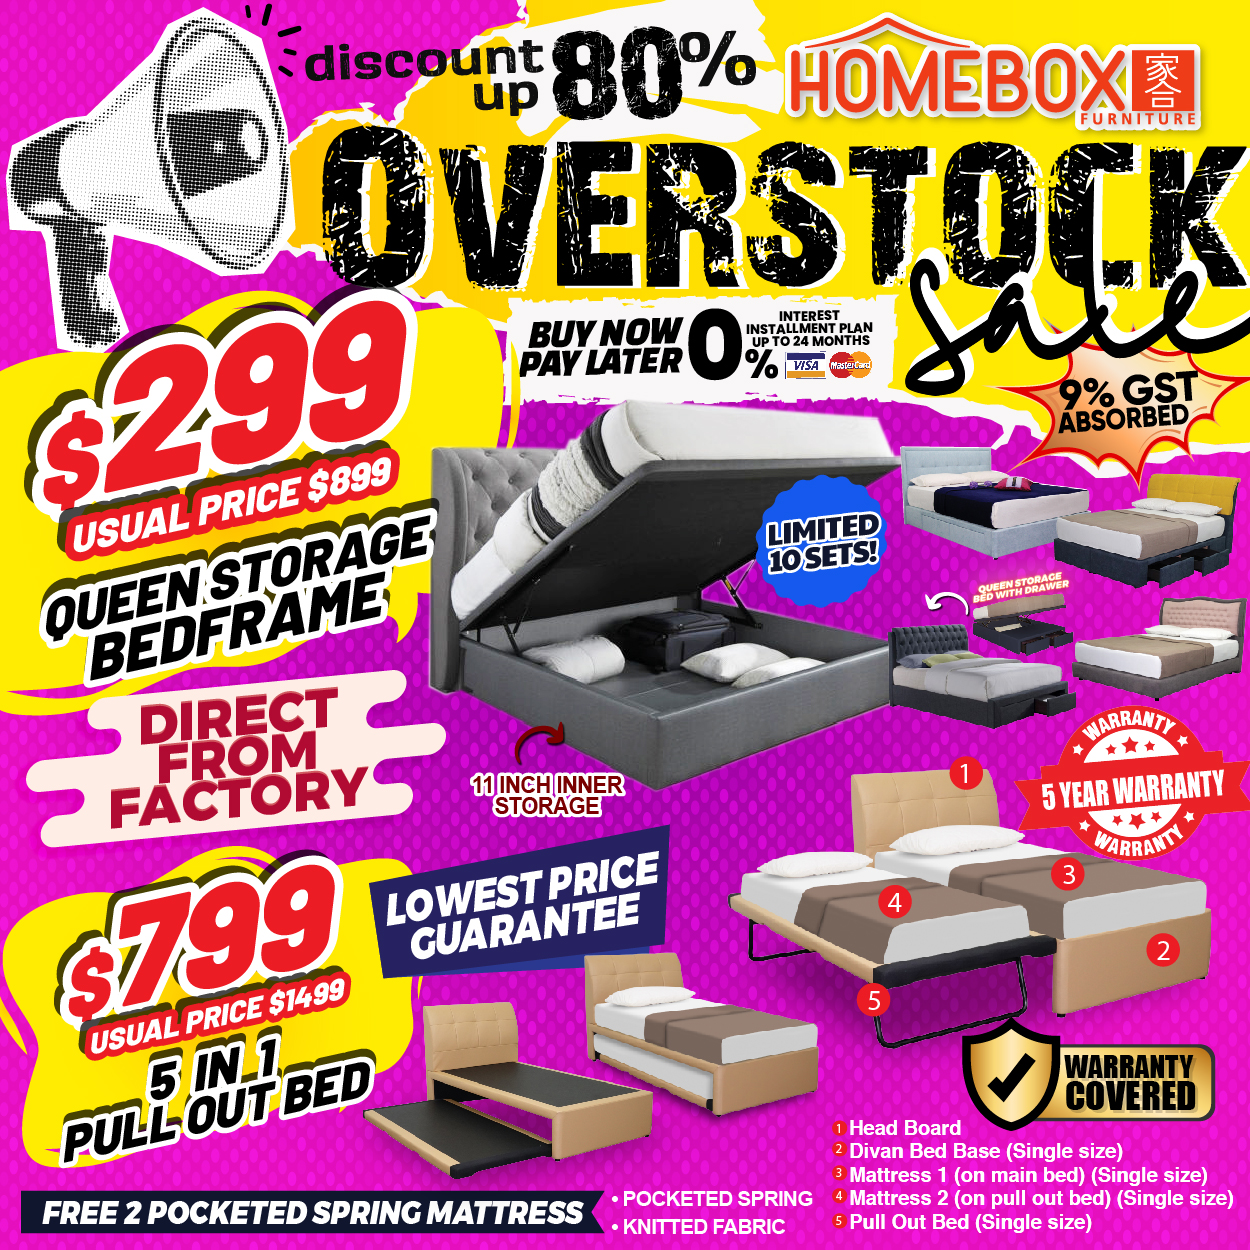 Lobang: Overstock sale at HOMEBOX Furniture @ Aljunied has furniture at up to 80% off from 17 Feb - 3 Mar 24 - 10